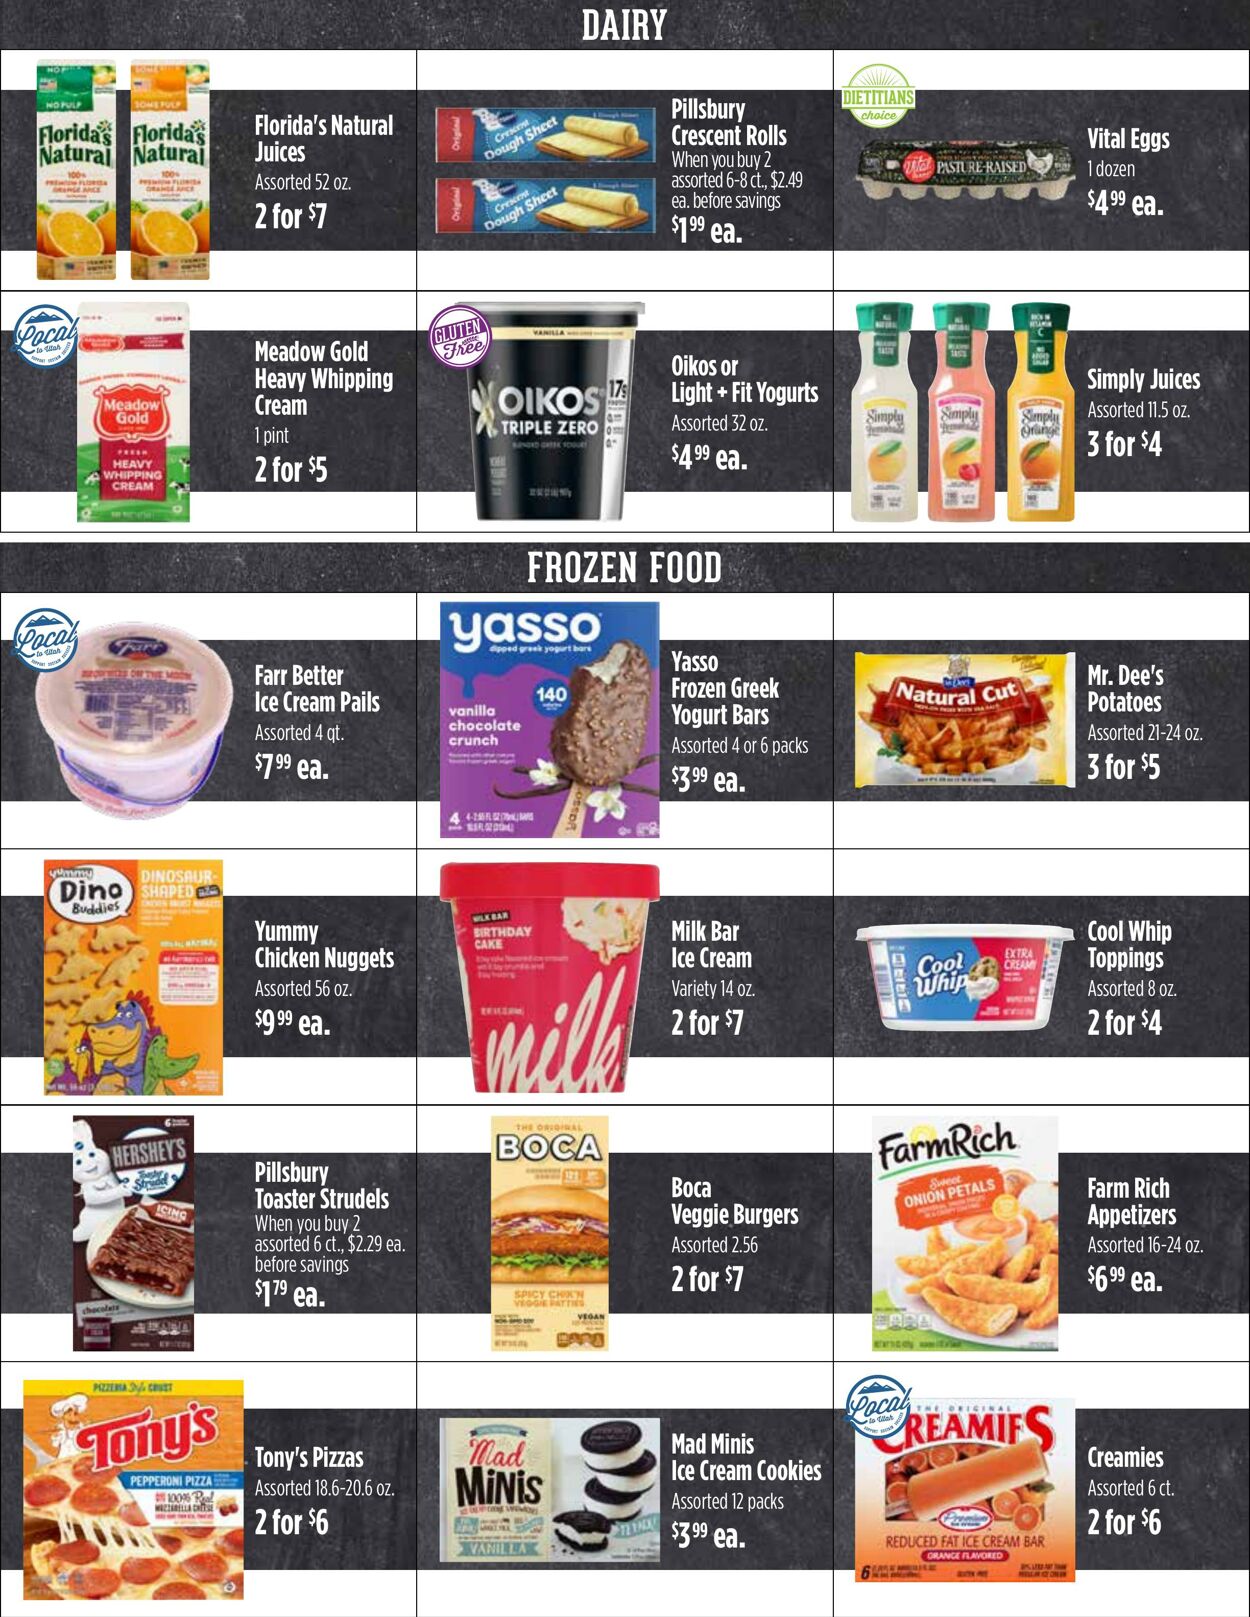 Weekly ad Harmons Grocery 07/19/2022 - 07/25/2022